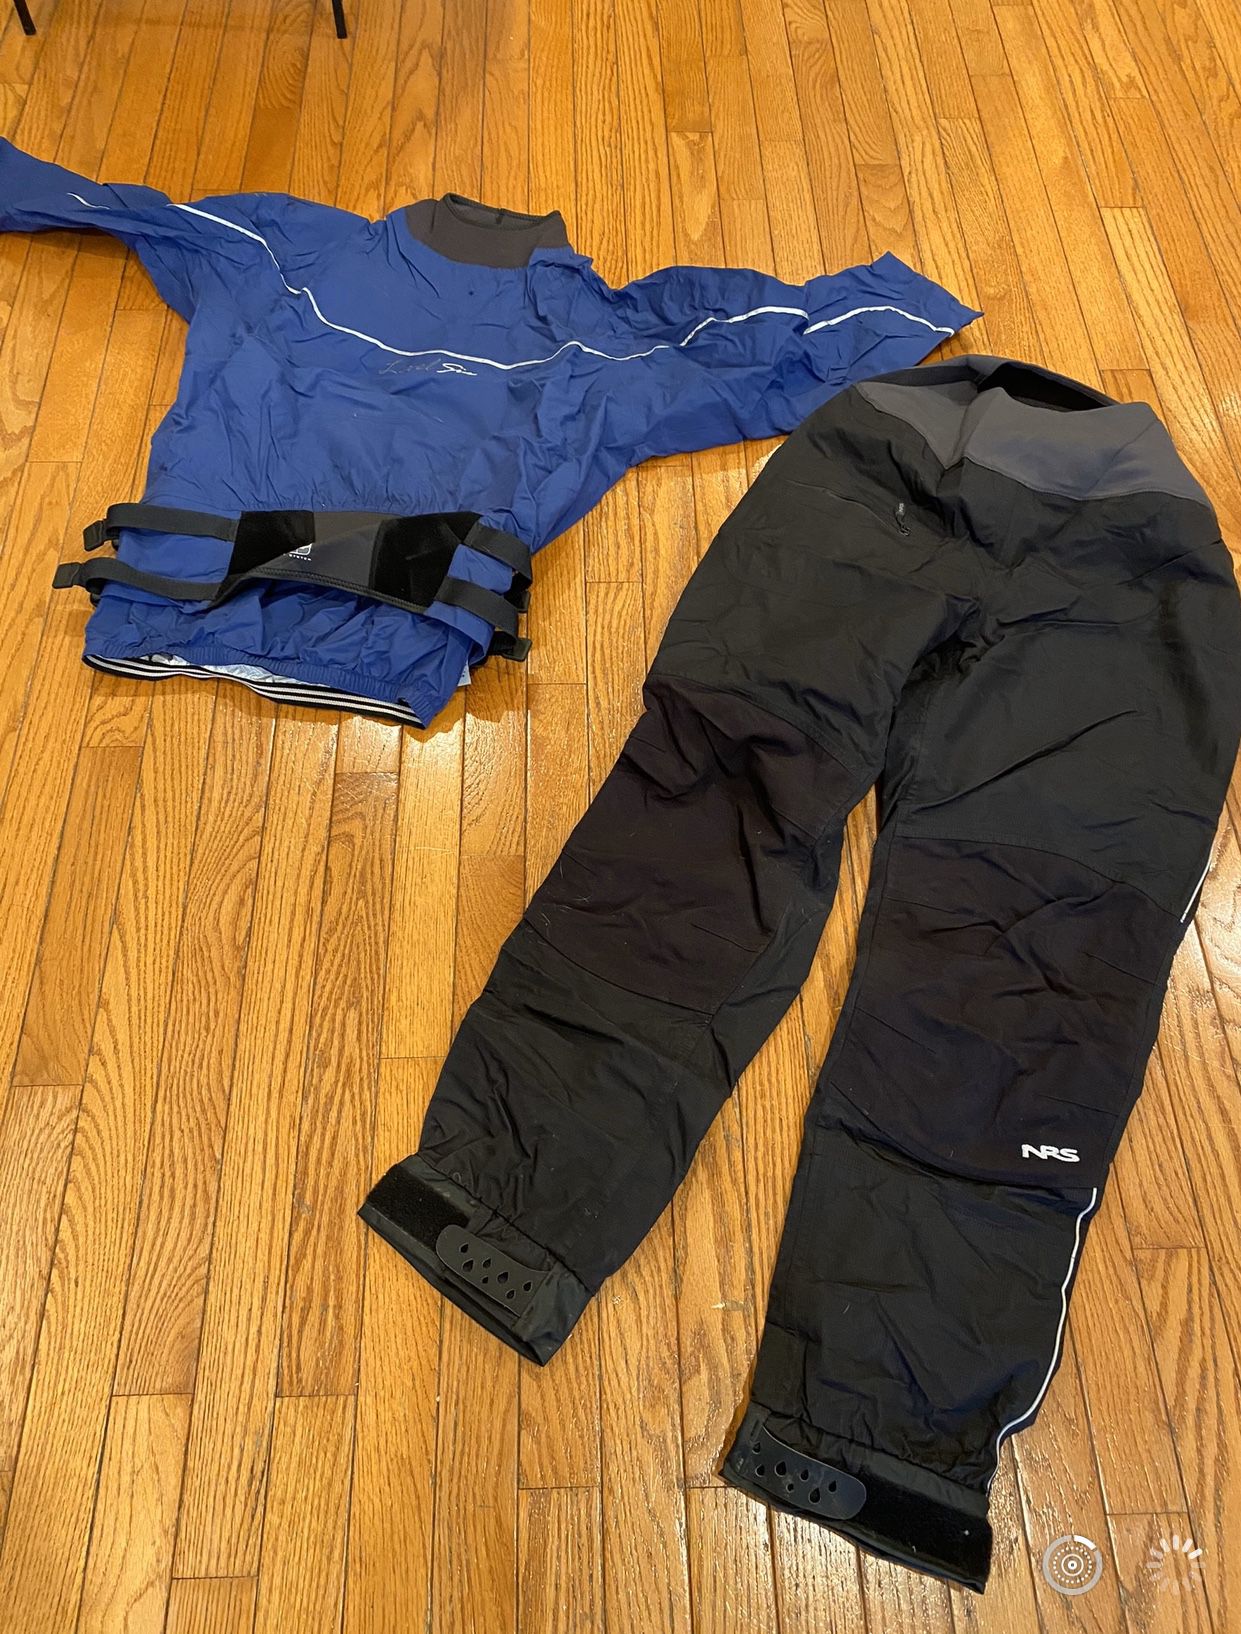 NRS and Level Six Dry-suit Pants and Top - women’s medium